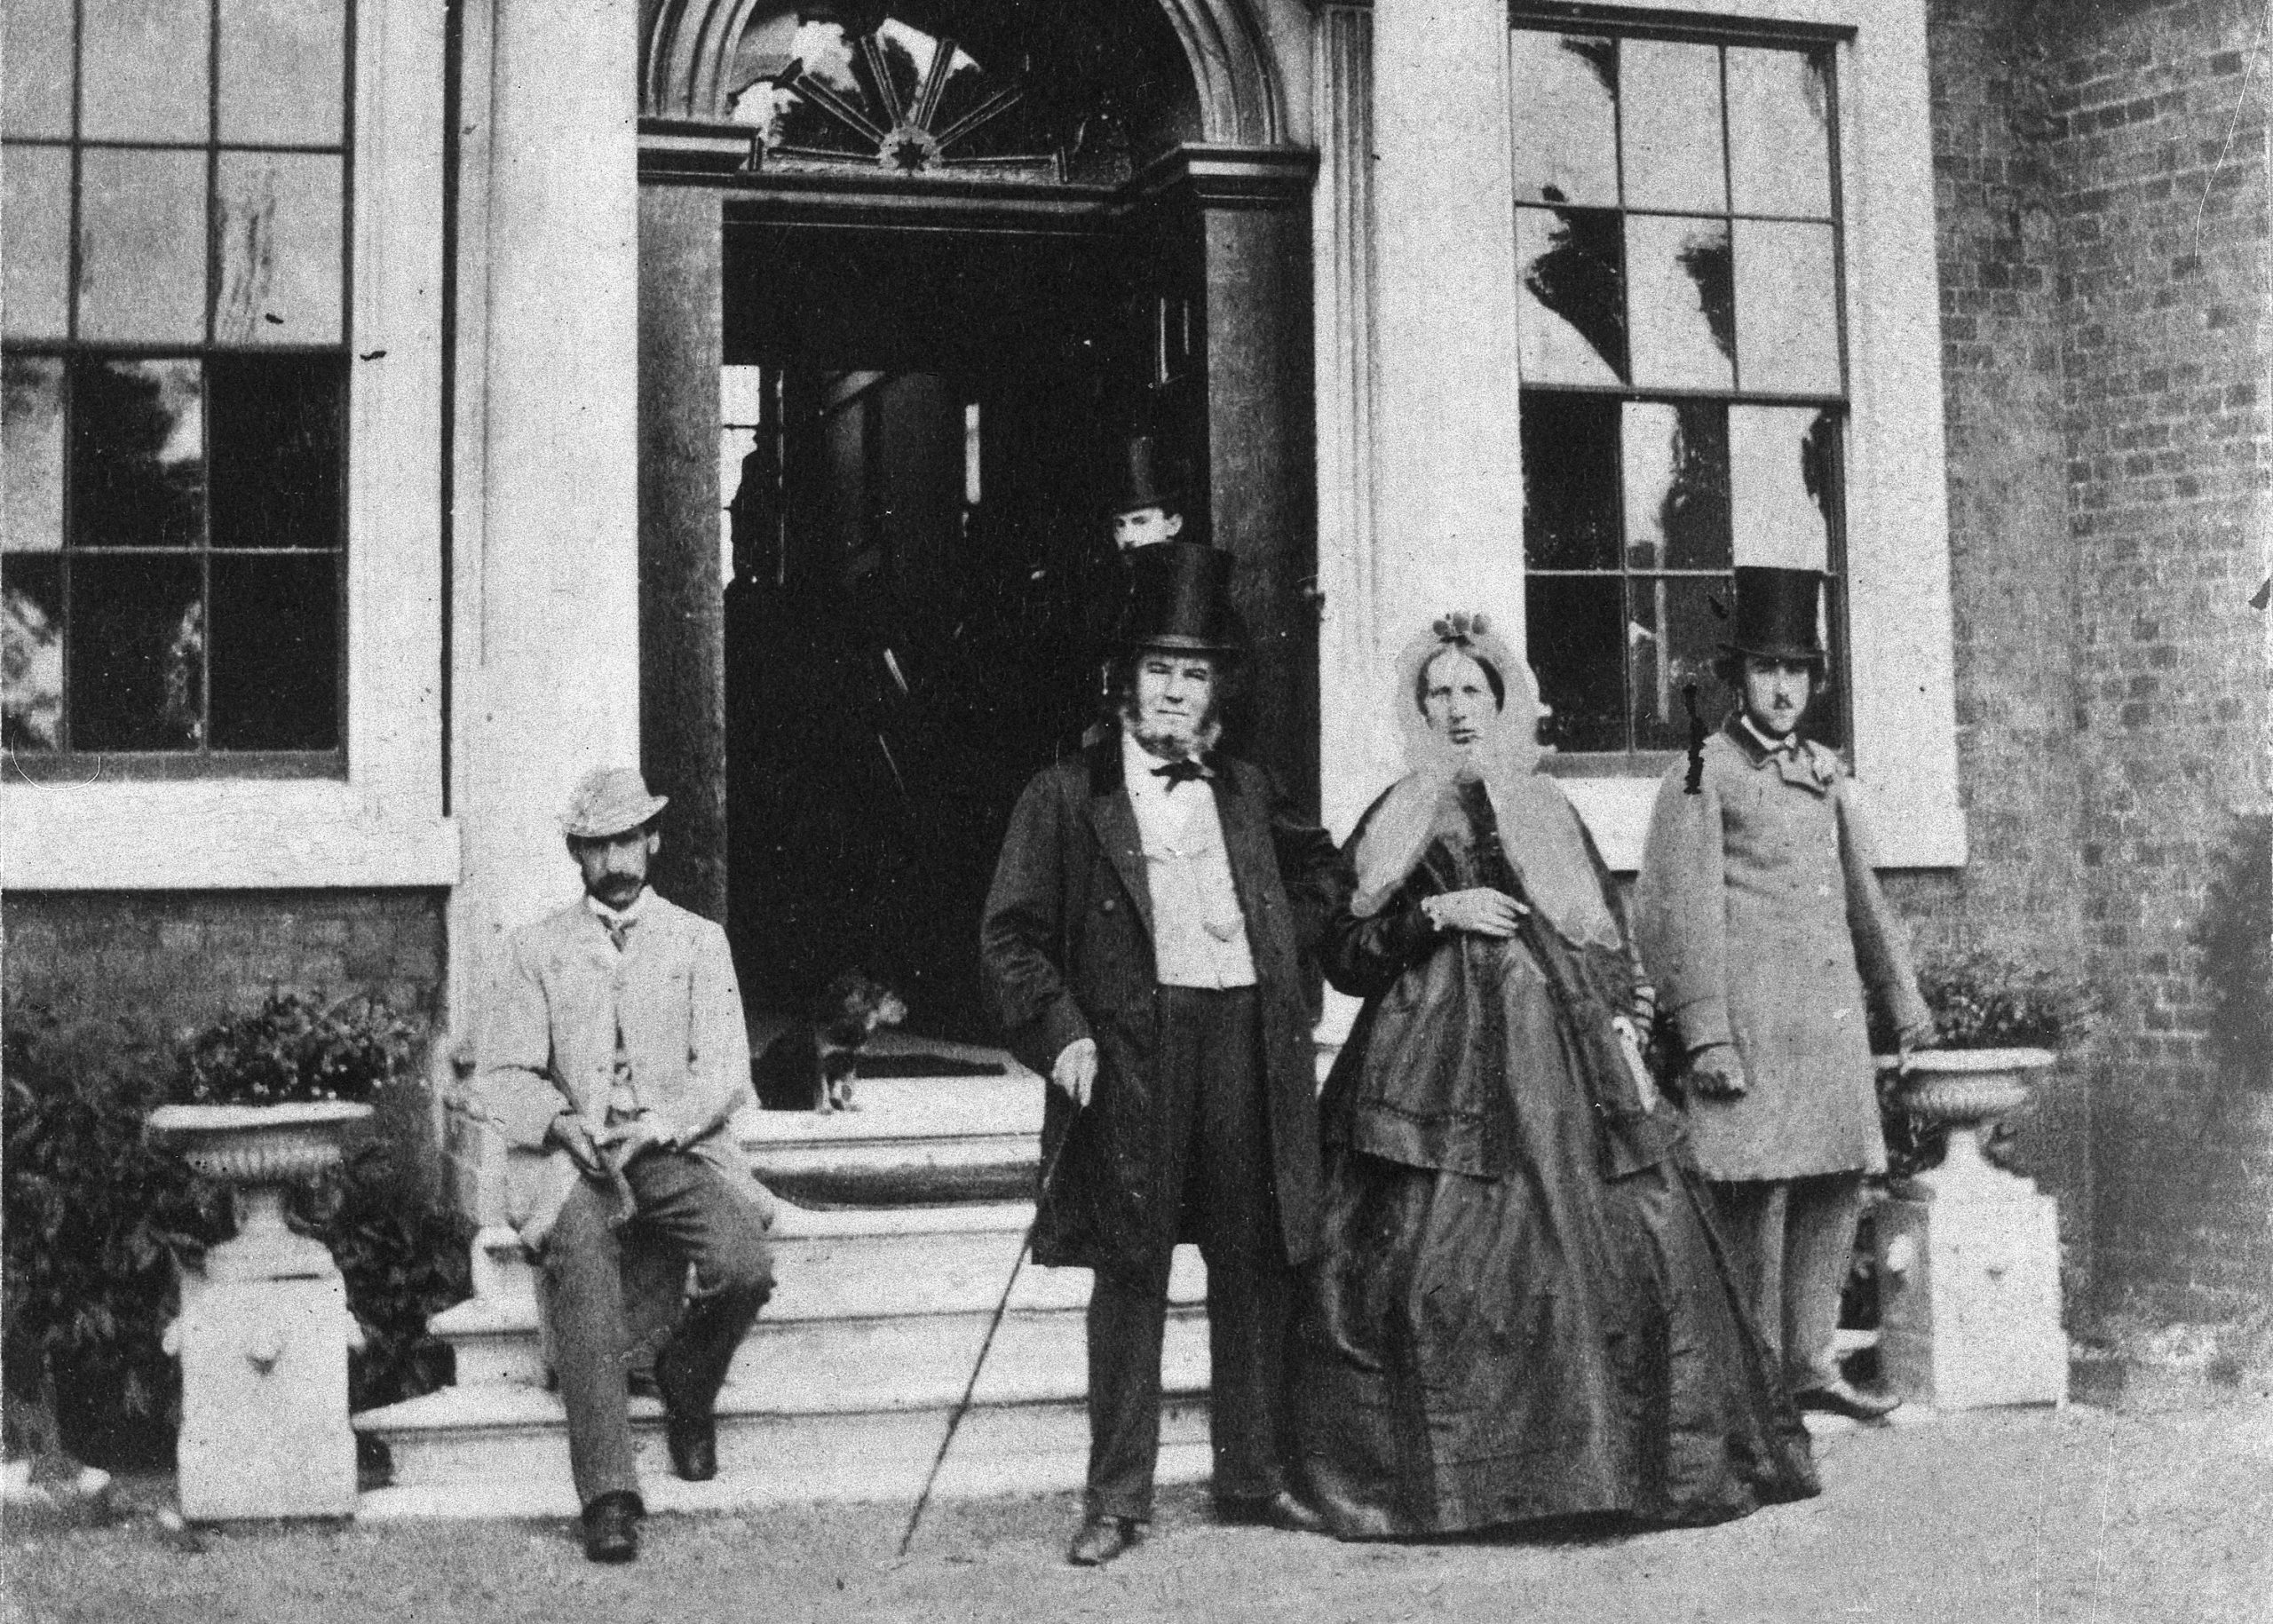 Image of the Lloyd Family outside the steps of their home, now William Morris Gallery. In black and white.